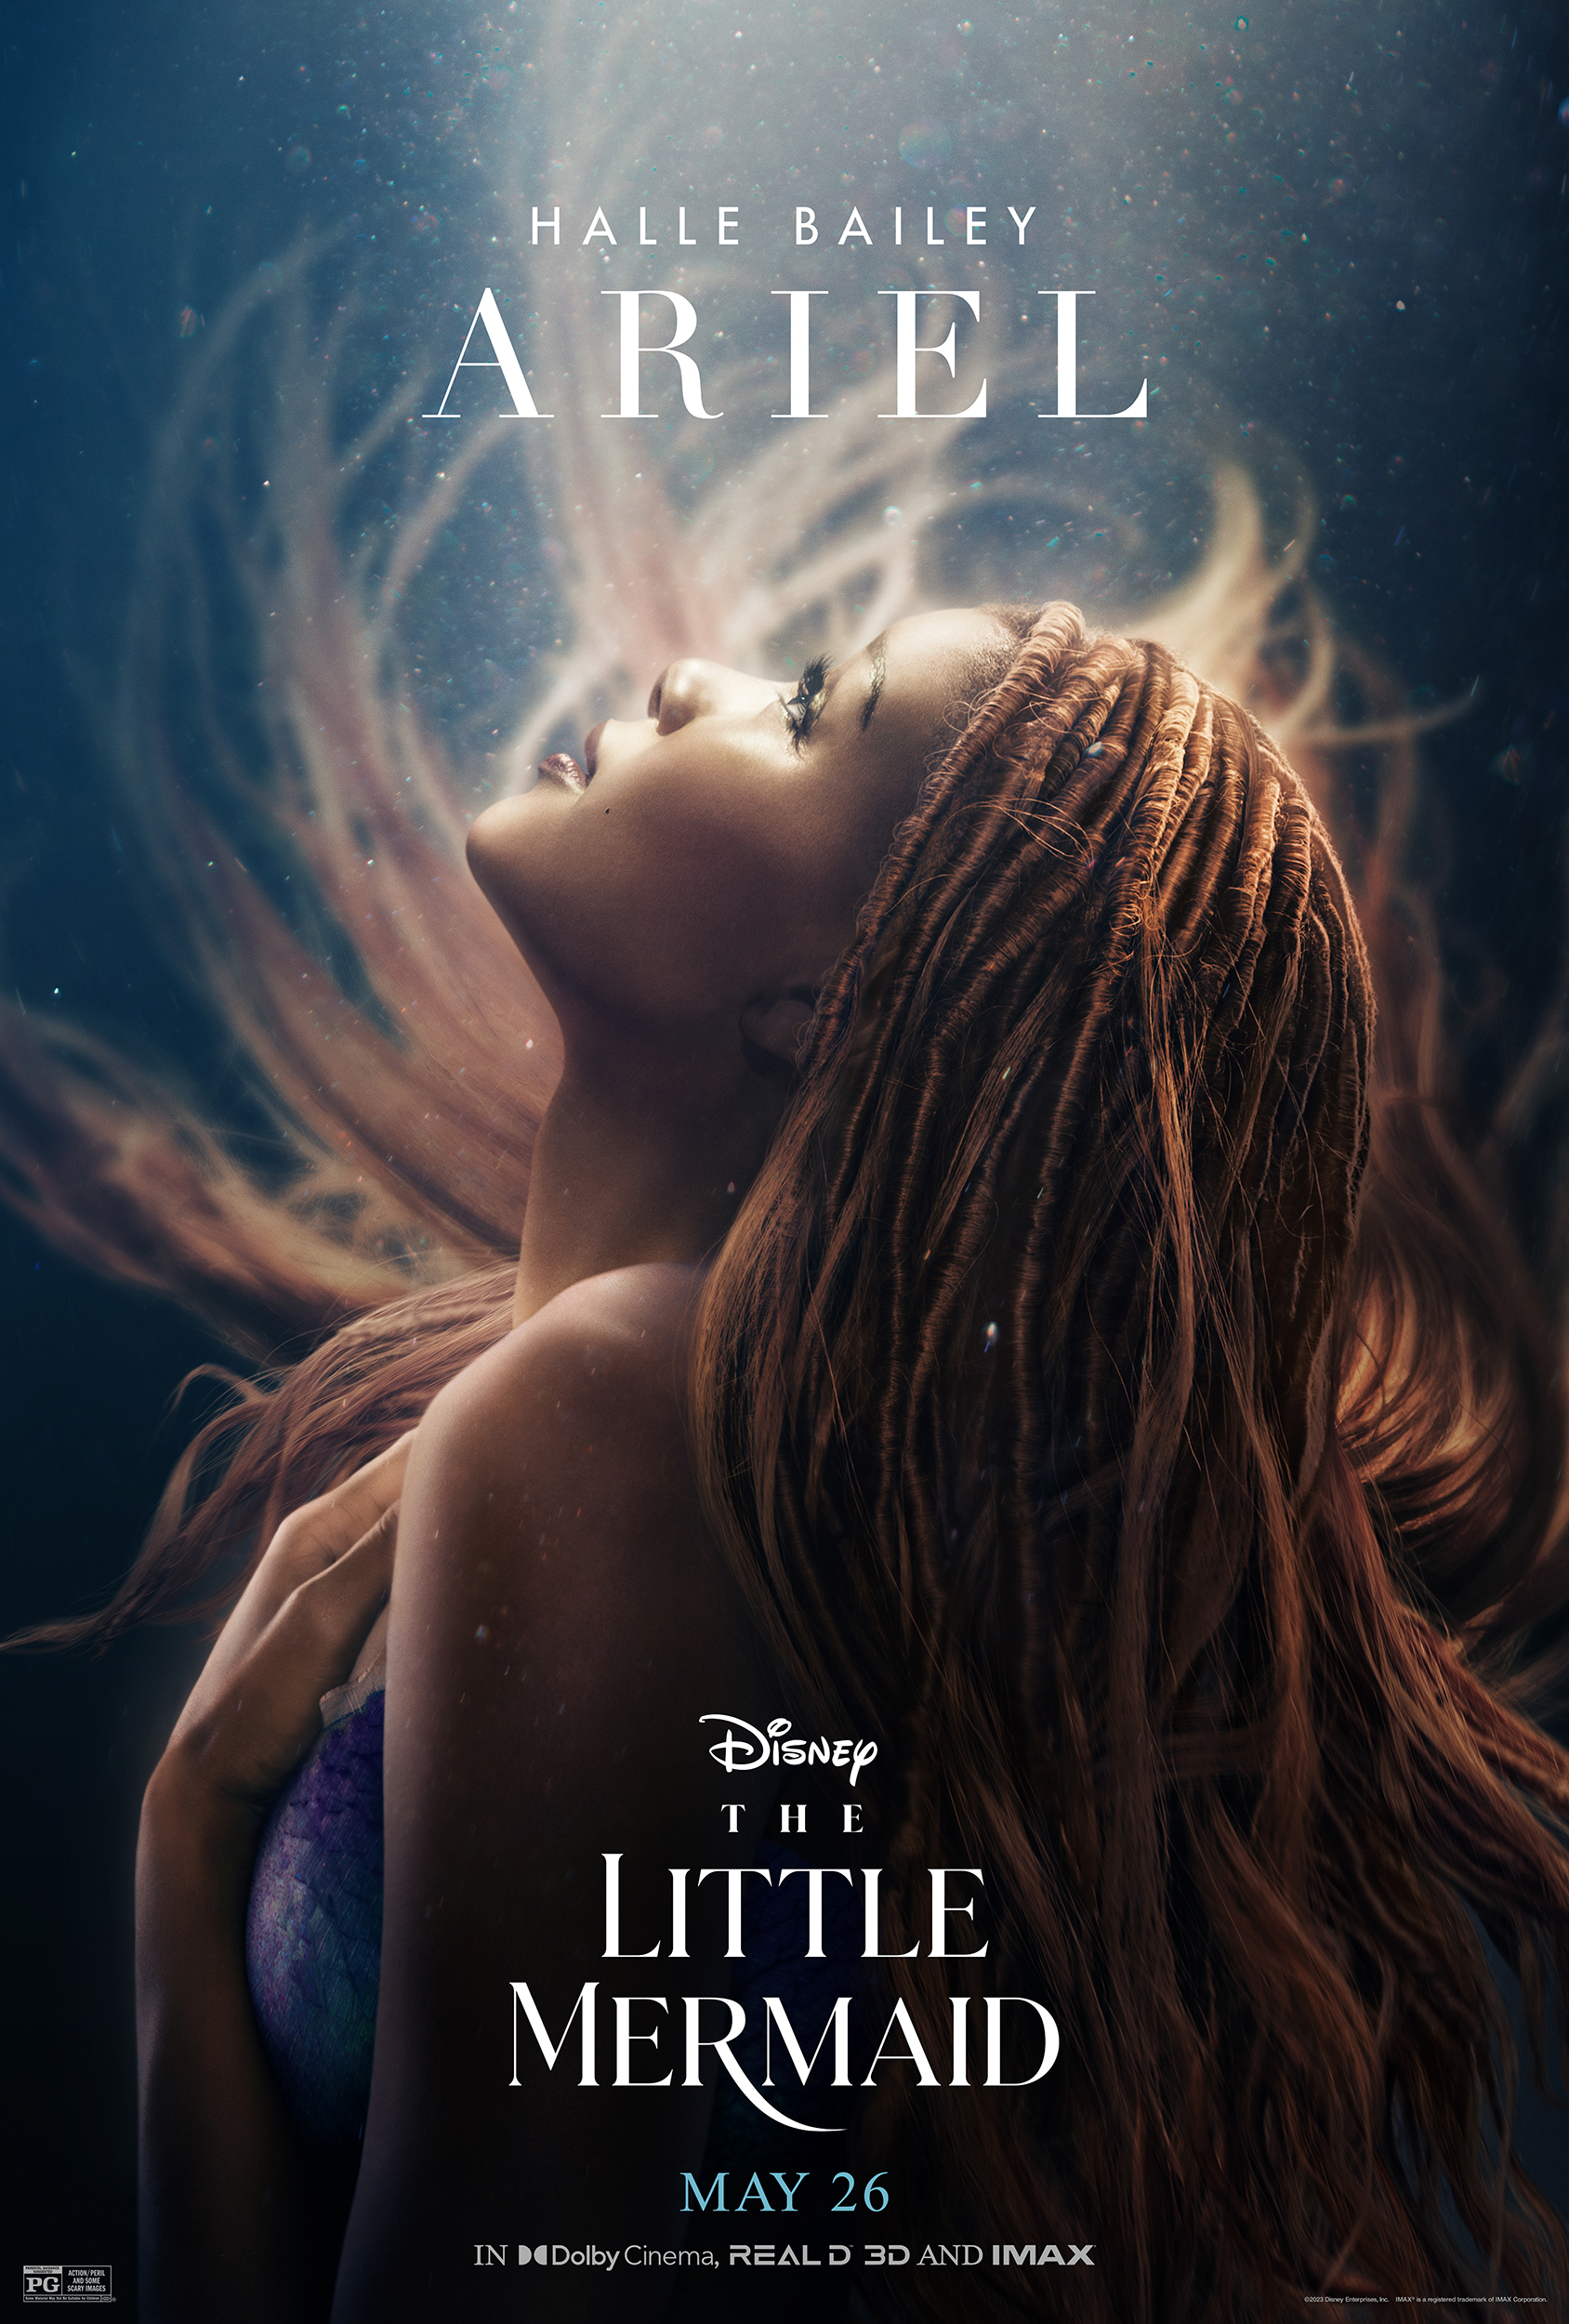 The Little Mermaid: Everything to Know About Disney's Live-Action Film